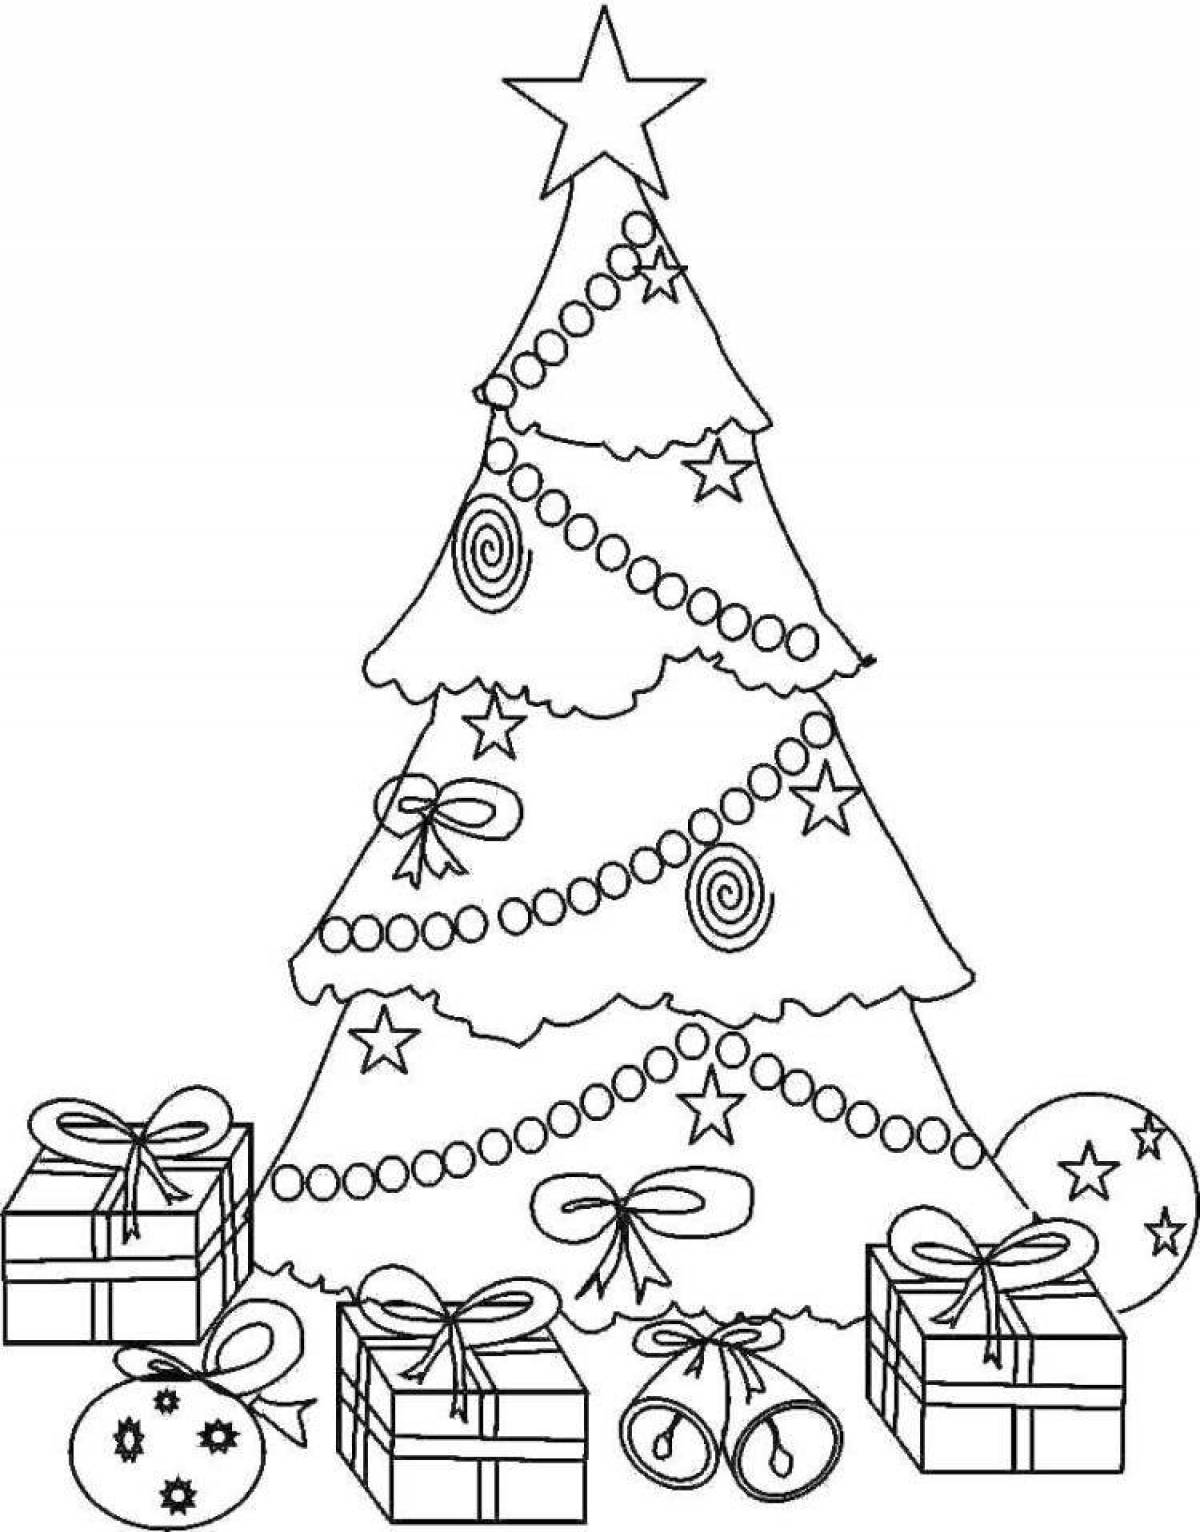 Exciting coloring tree with gifts